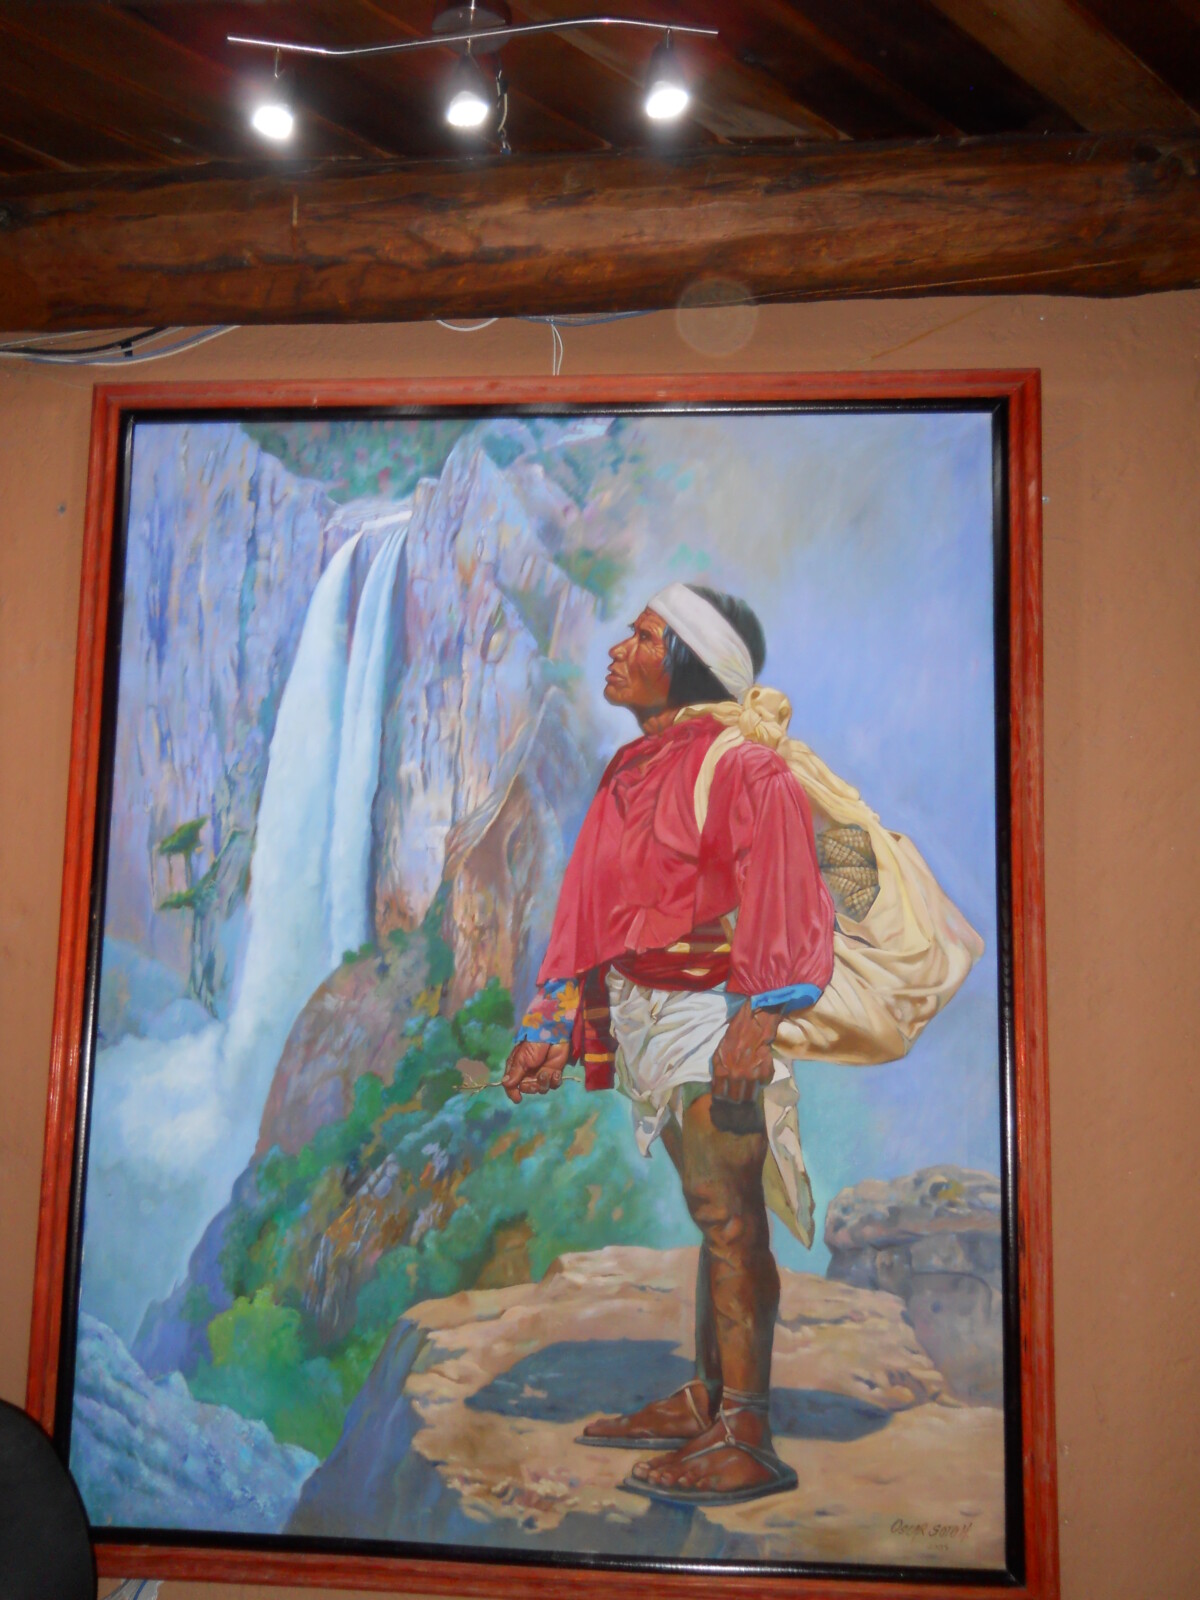 A painting of a Tarahumara Indian in Mexico's Copper Canyon.